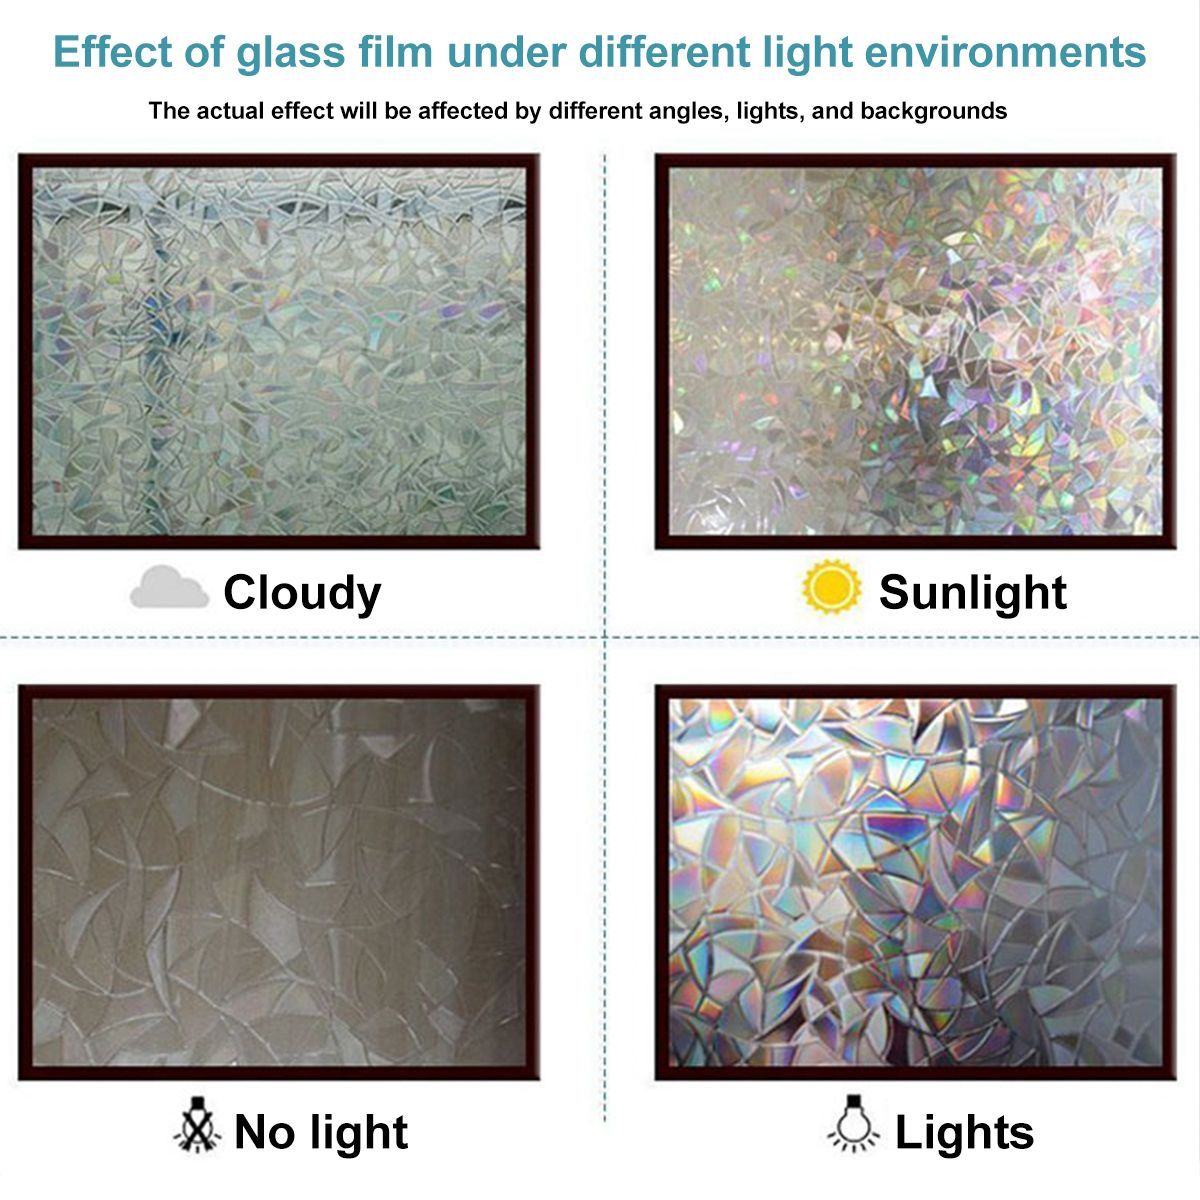 45100cm-3D-Glass-Sticker-Adhesive-free-Electrostatic-Glass-Film-Anti-UV-For-Home-Office-1719664